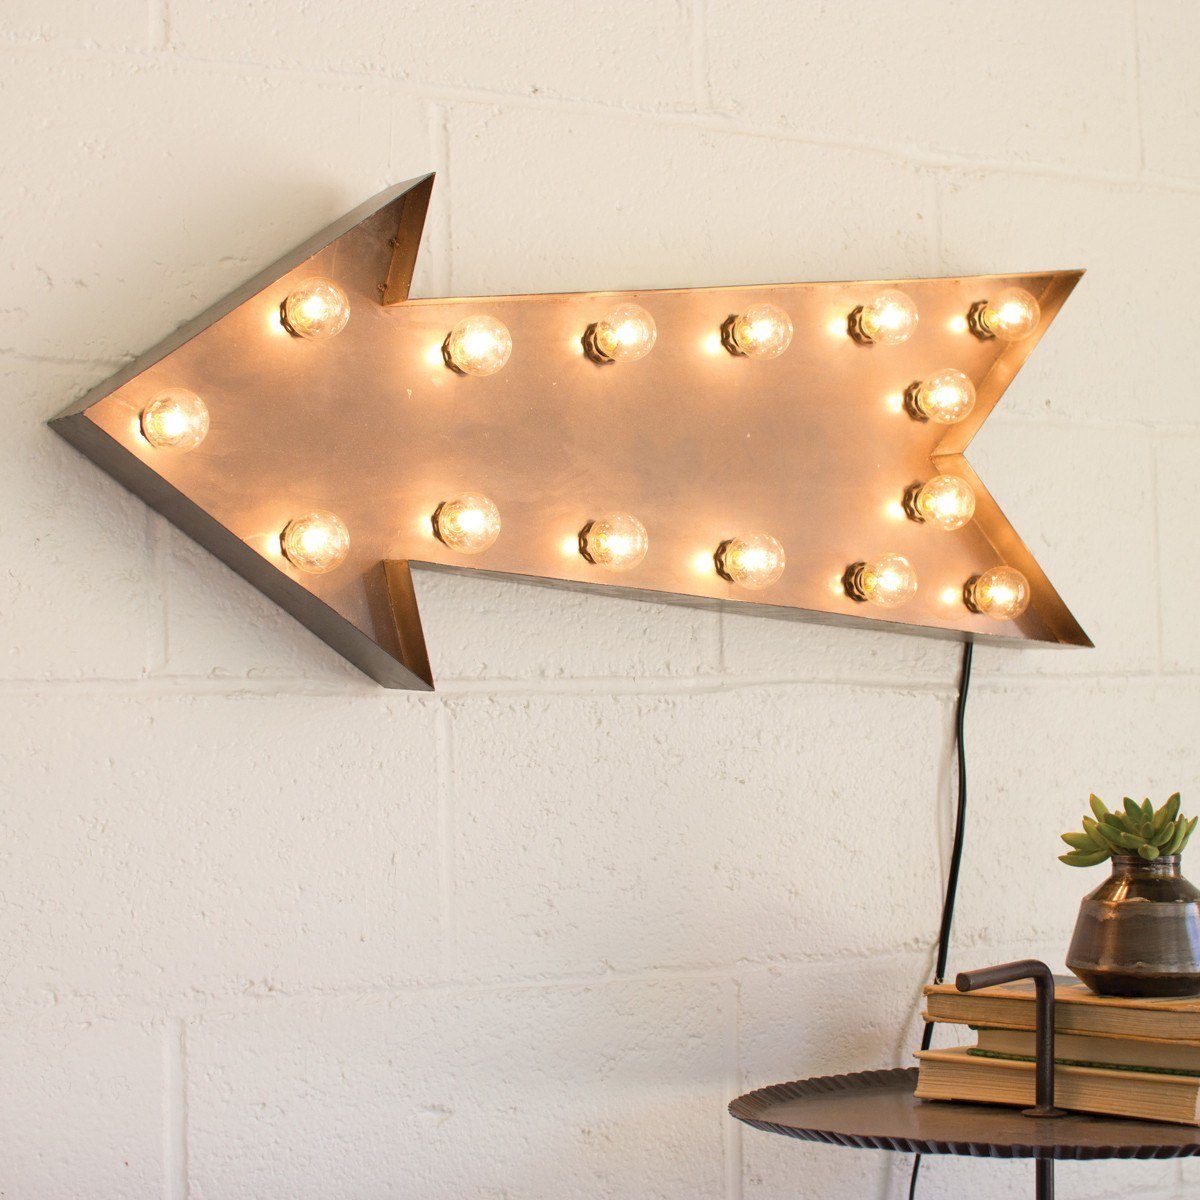 36” Large Arrow Vintage Marquee Marquee with Lights (Rustic) Lights Sign The Rusty - Buy - Marquee Online